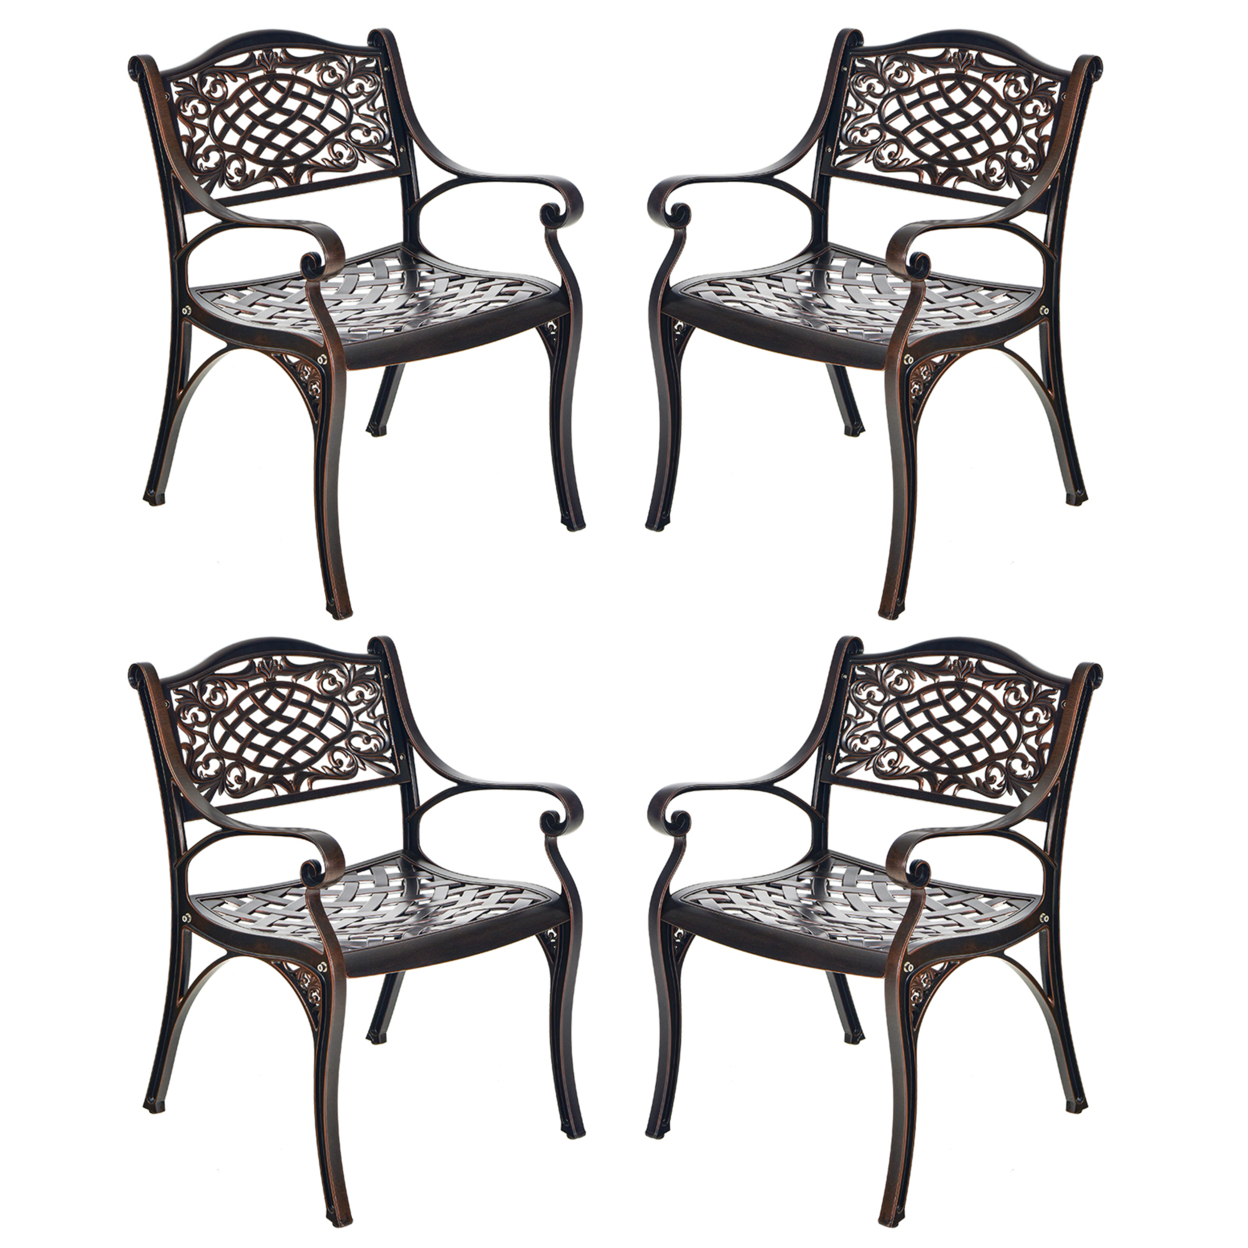 Set Of 4 Outdoor Dining Chairs Cast Aluminum Patio Bistro Chairs Armchairs